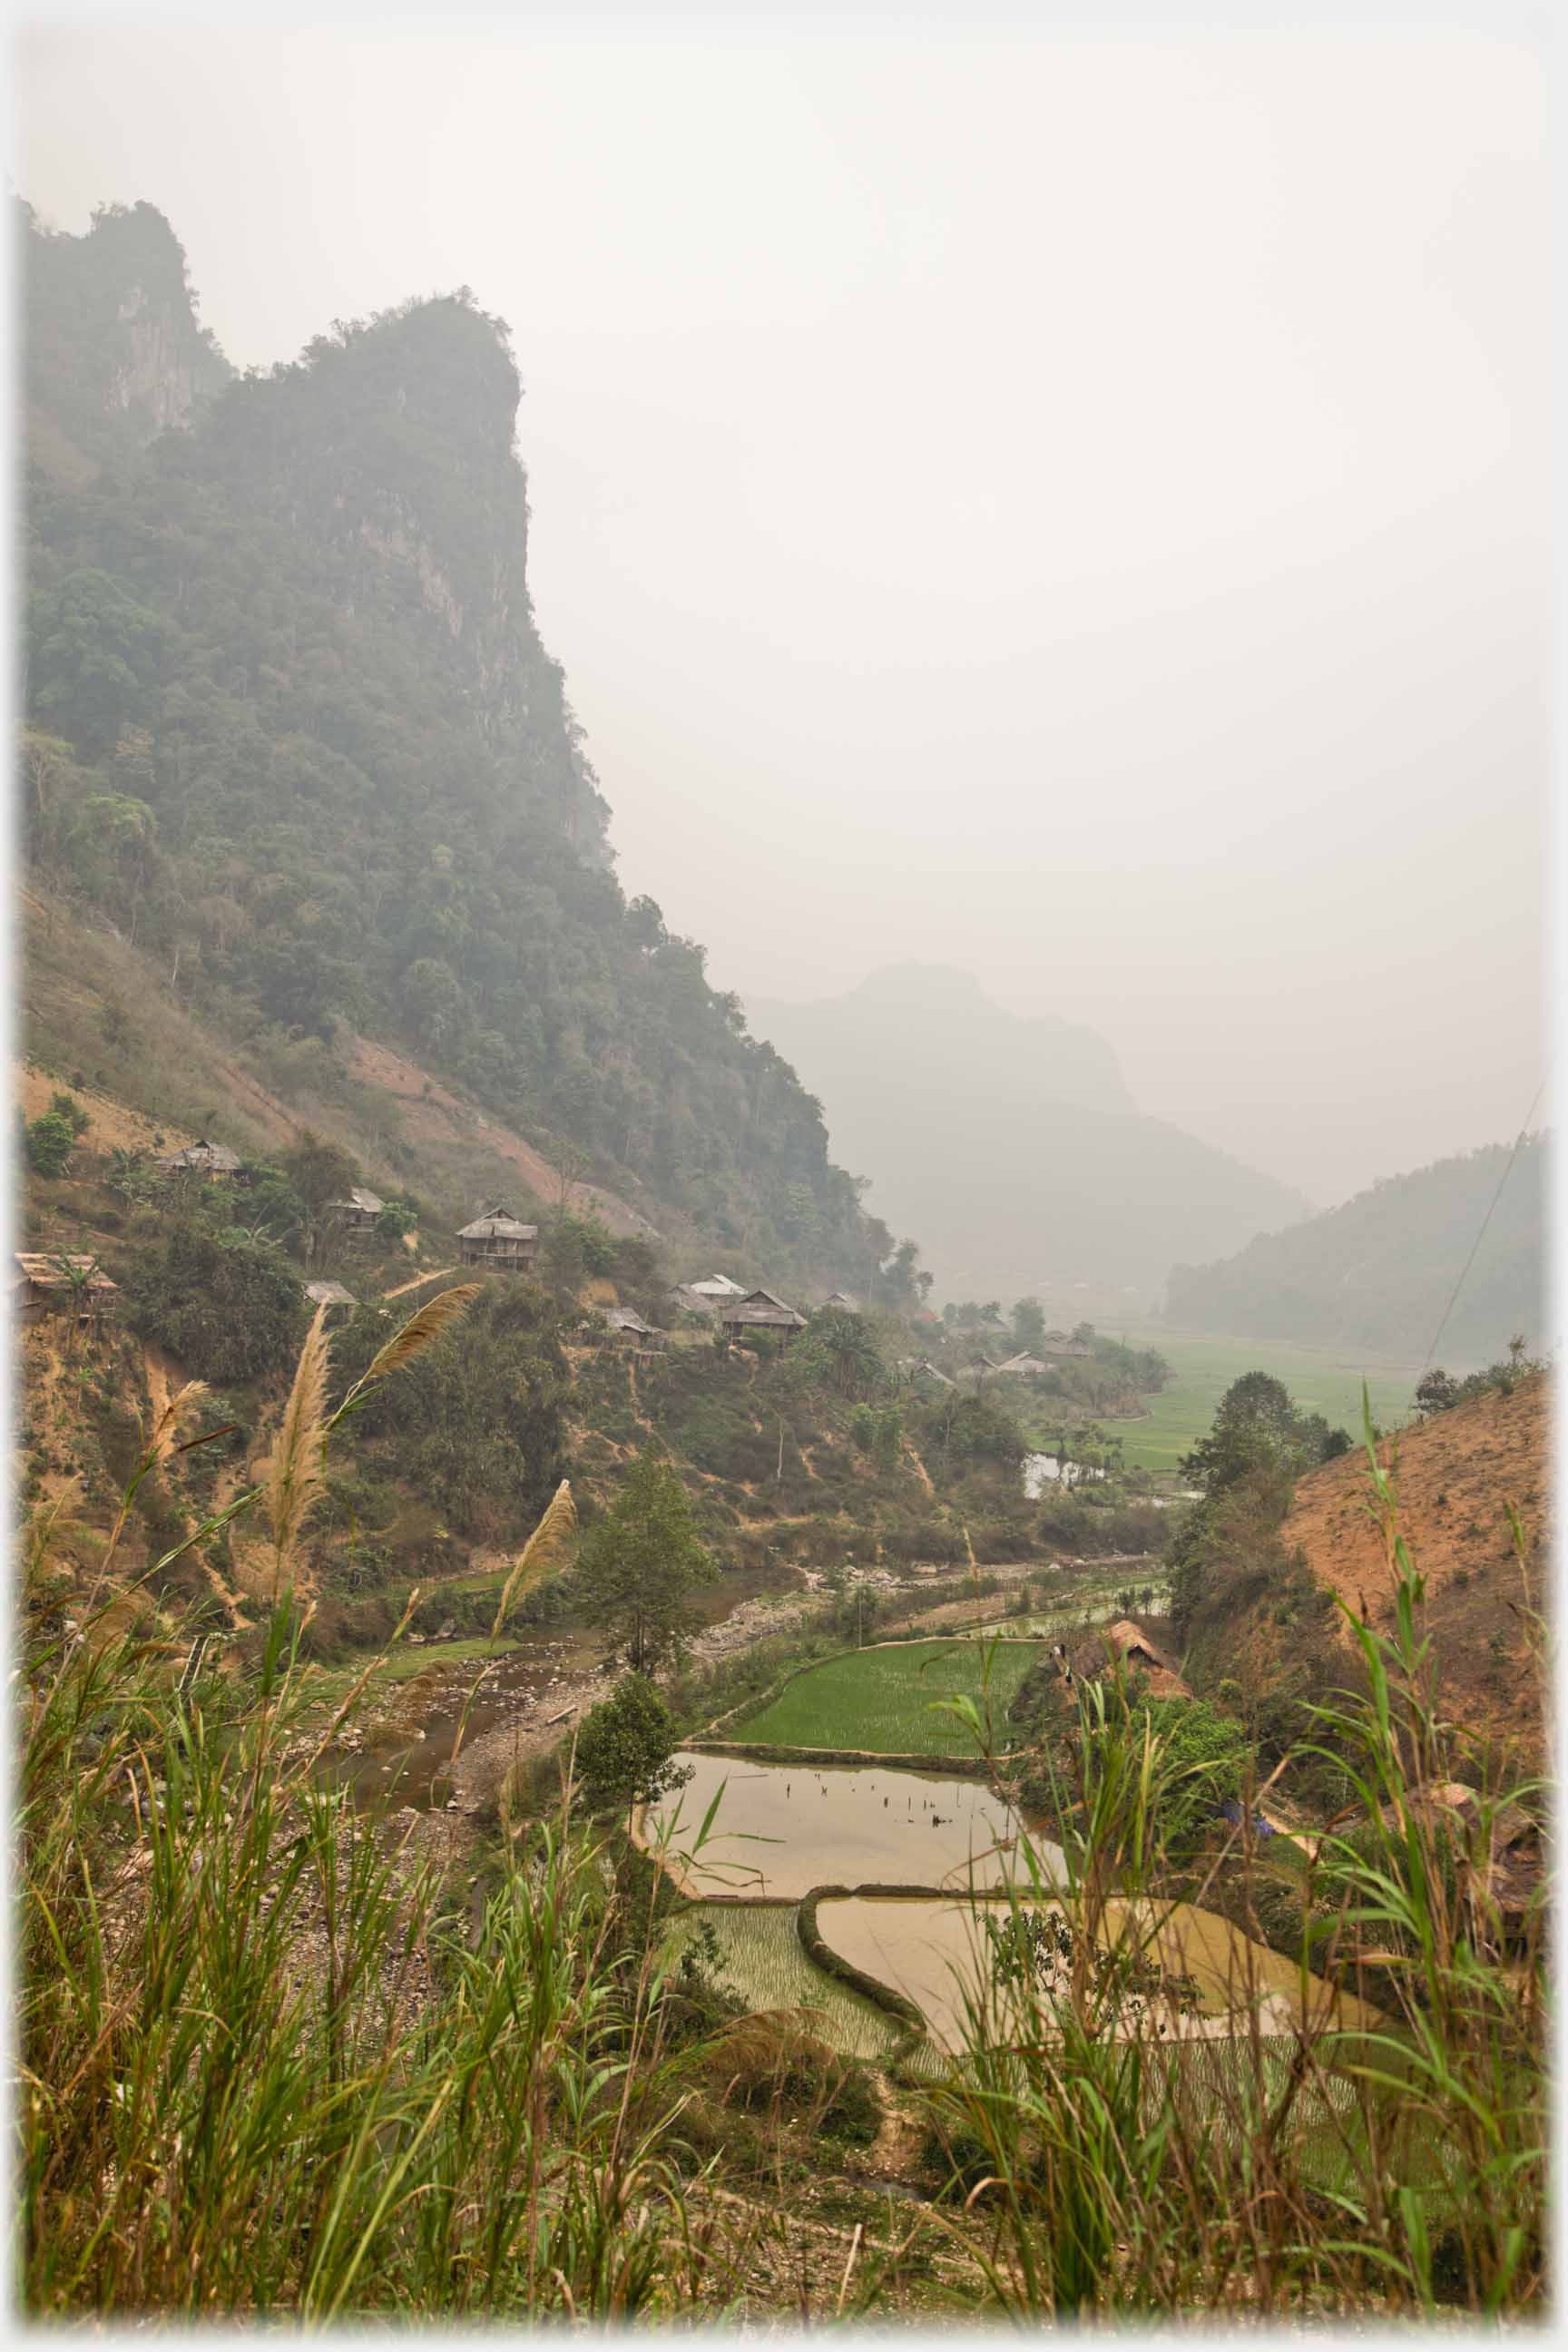 Vertical wall of wooded karst above village, paddy fields in valley bottom.